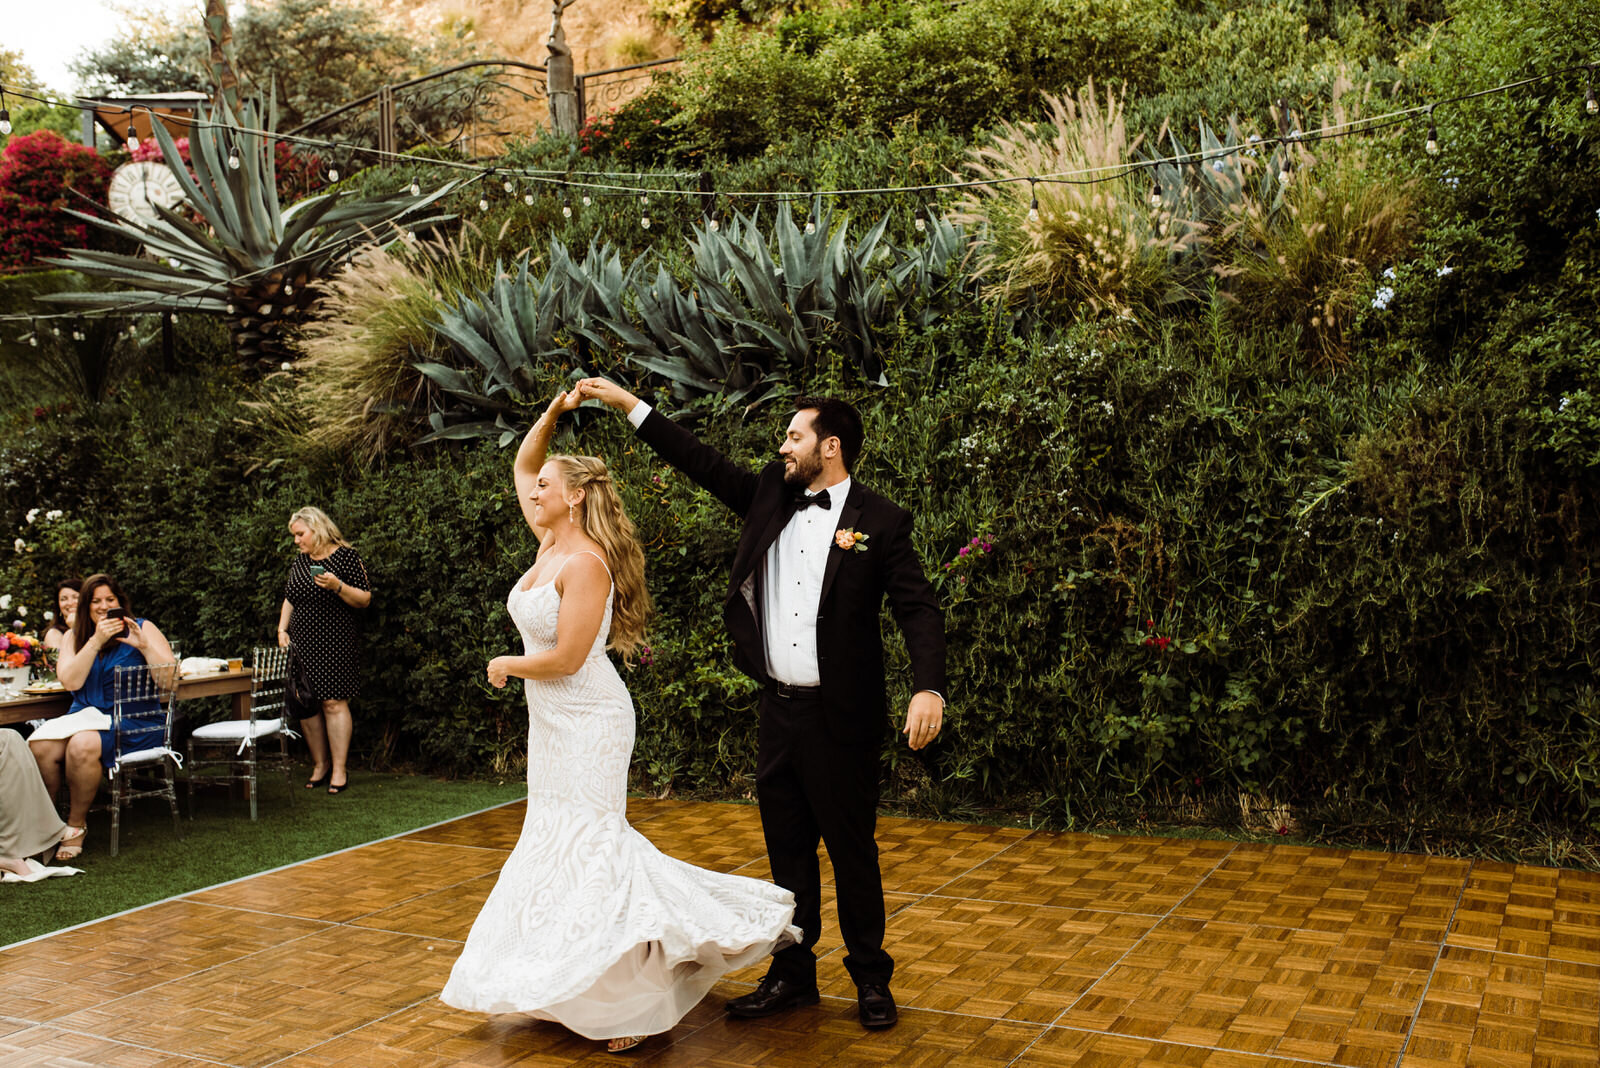 Groom in black tux spins bride at Summer Houdini Estate Wedding in Los Angeles | photo by Kept Record | www.keptrecord.com